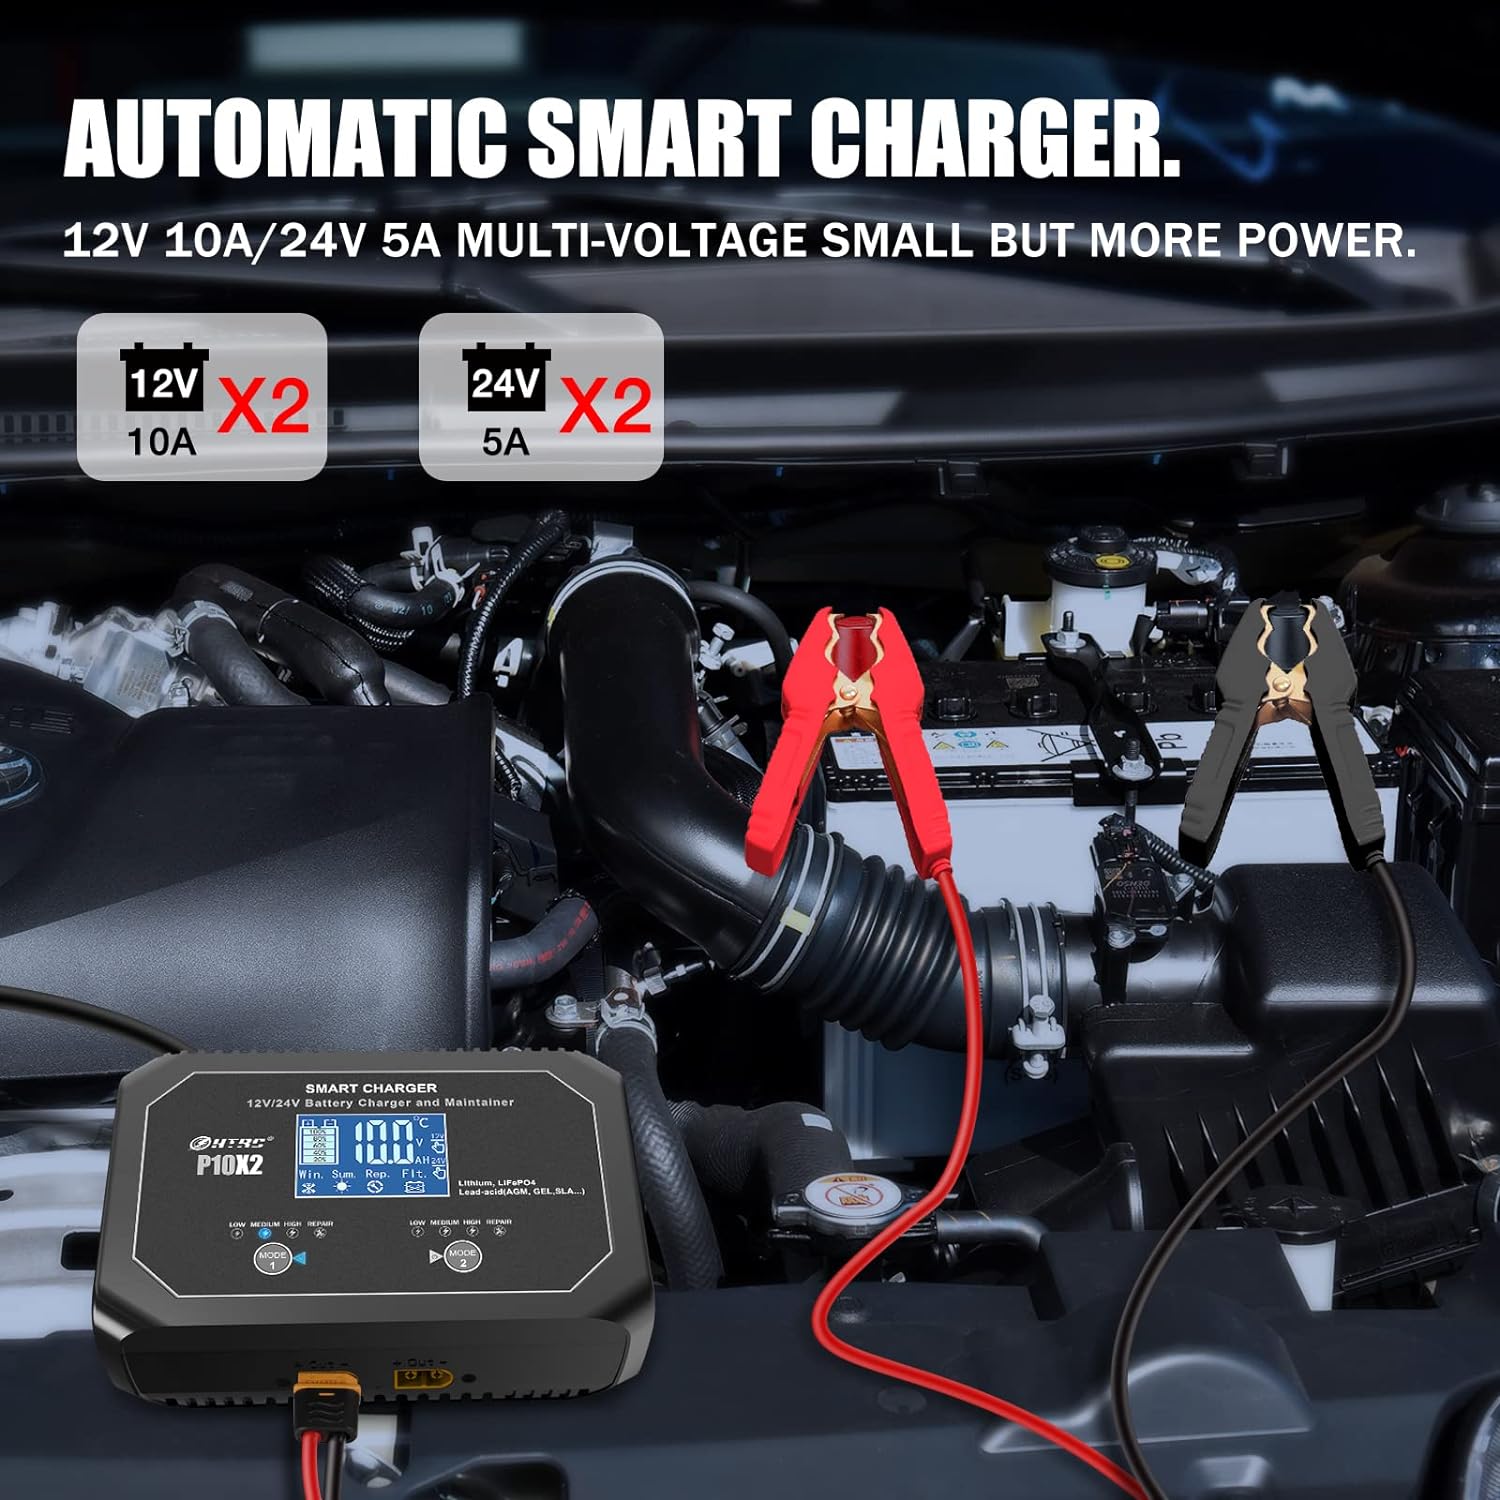 20-Amp (10-Amp Per Bank) Dual Smart Charger,Car Battery Charger,12V and 24V,Lithium,LiFePO4,Lead-Acid(AGM/Gel/SLA..),Trickle Charger, Maintainer/deep Cycle Charger,for Boat,Motorcycle.. - Dual Smart Charger Review